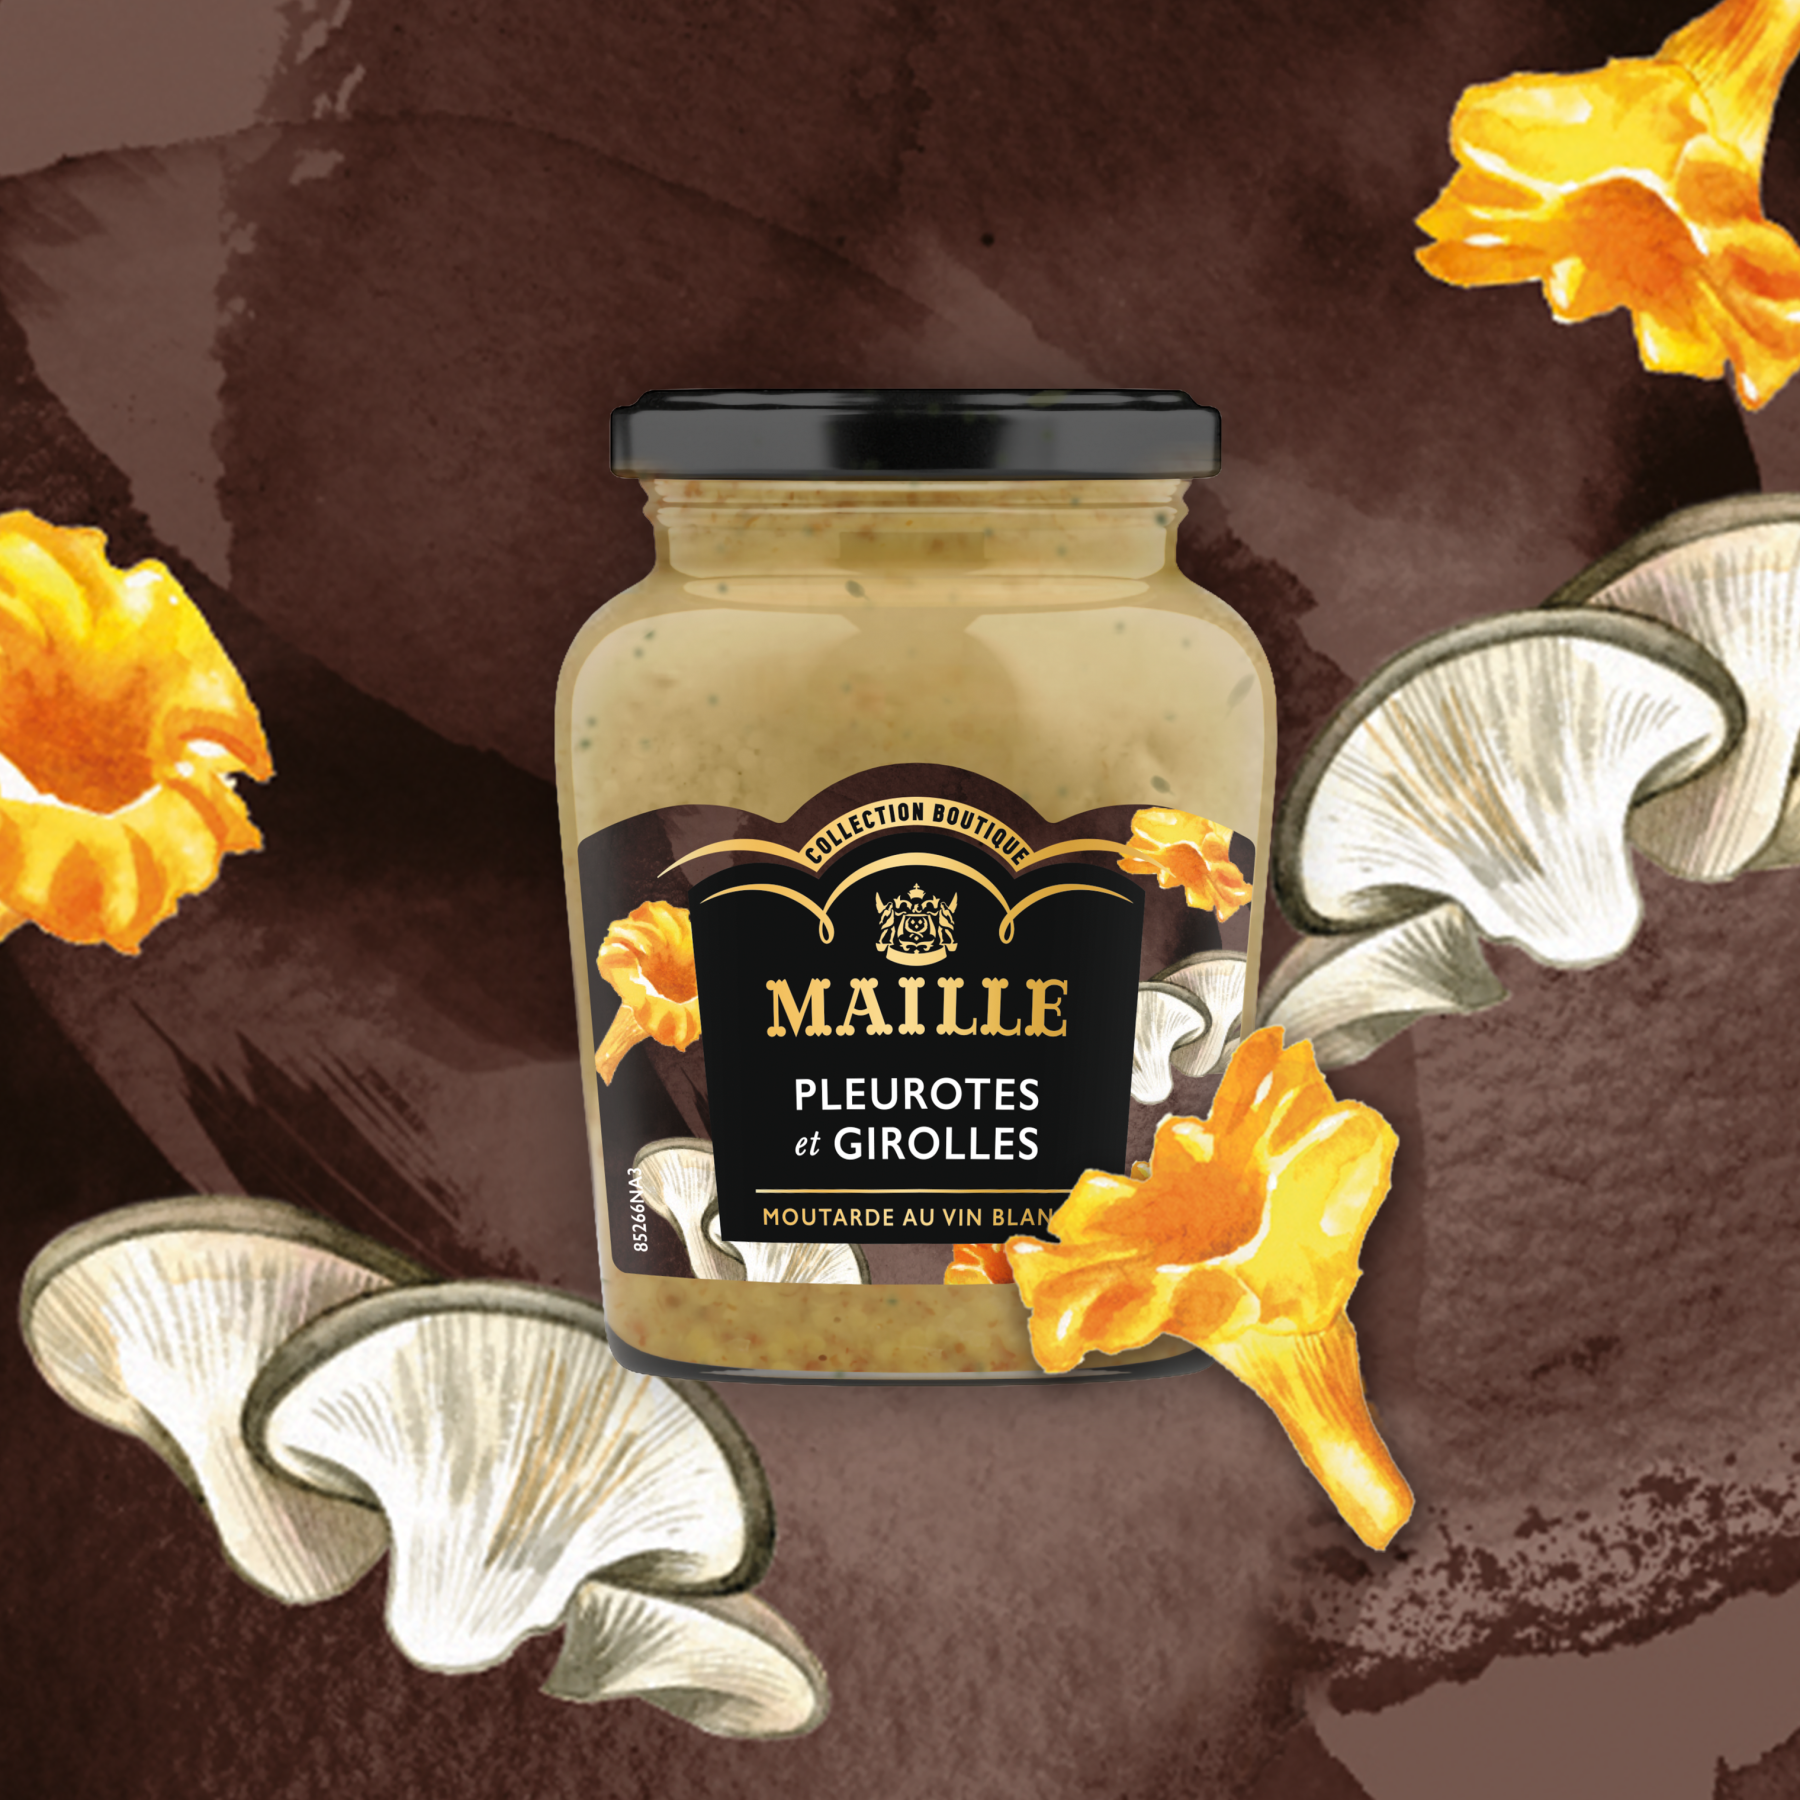 Maille - Moutarde au vin blanc, pleurotes et girolles, 108 g, new visual